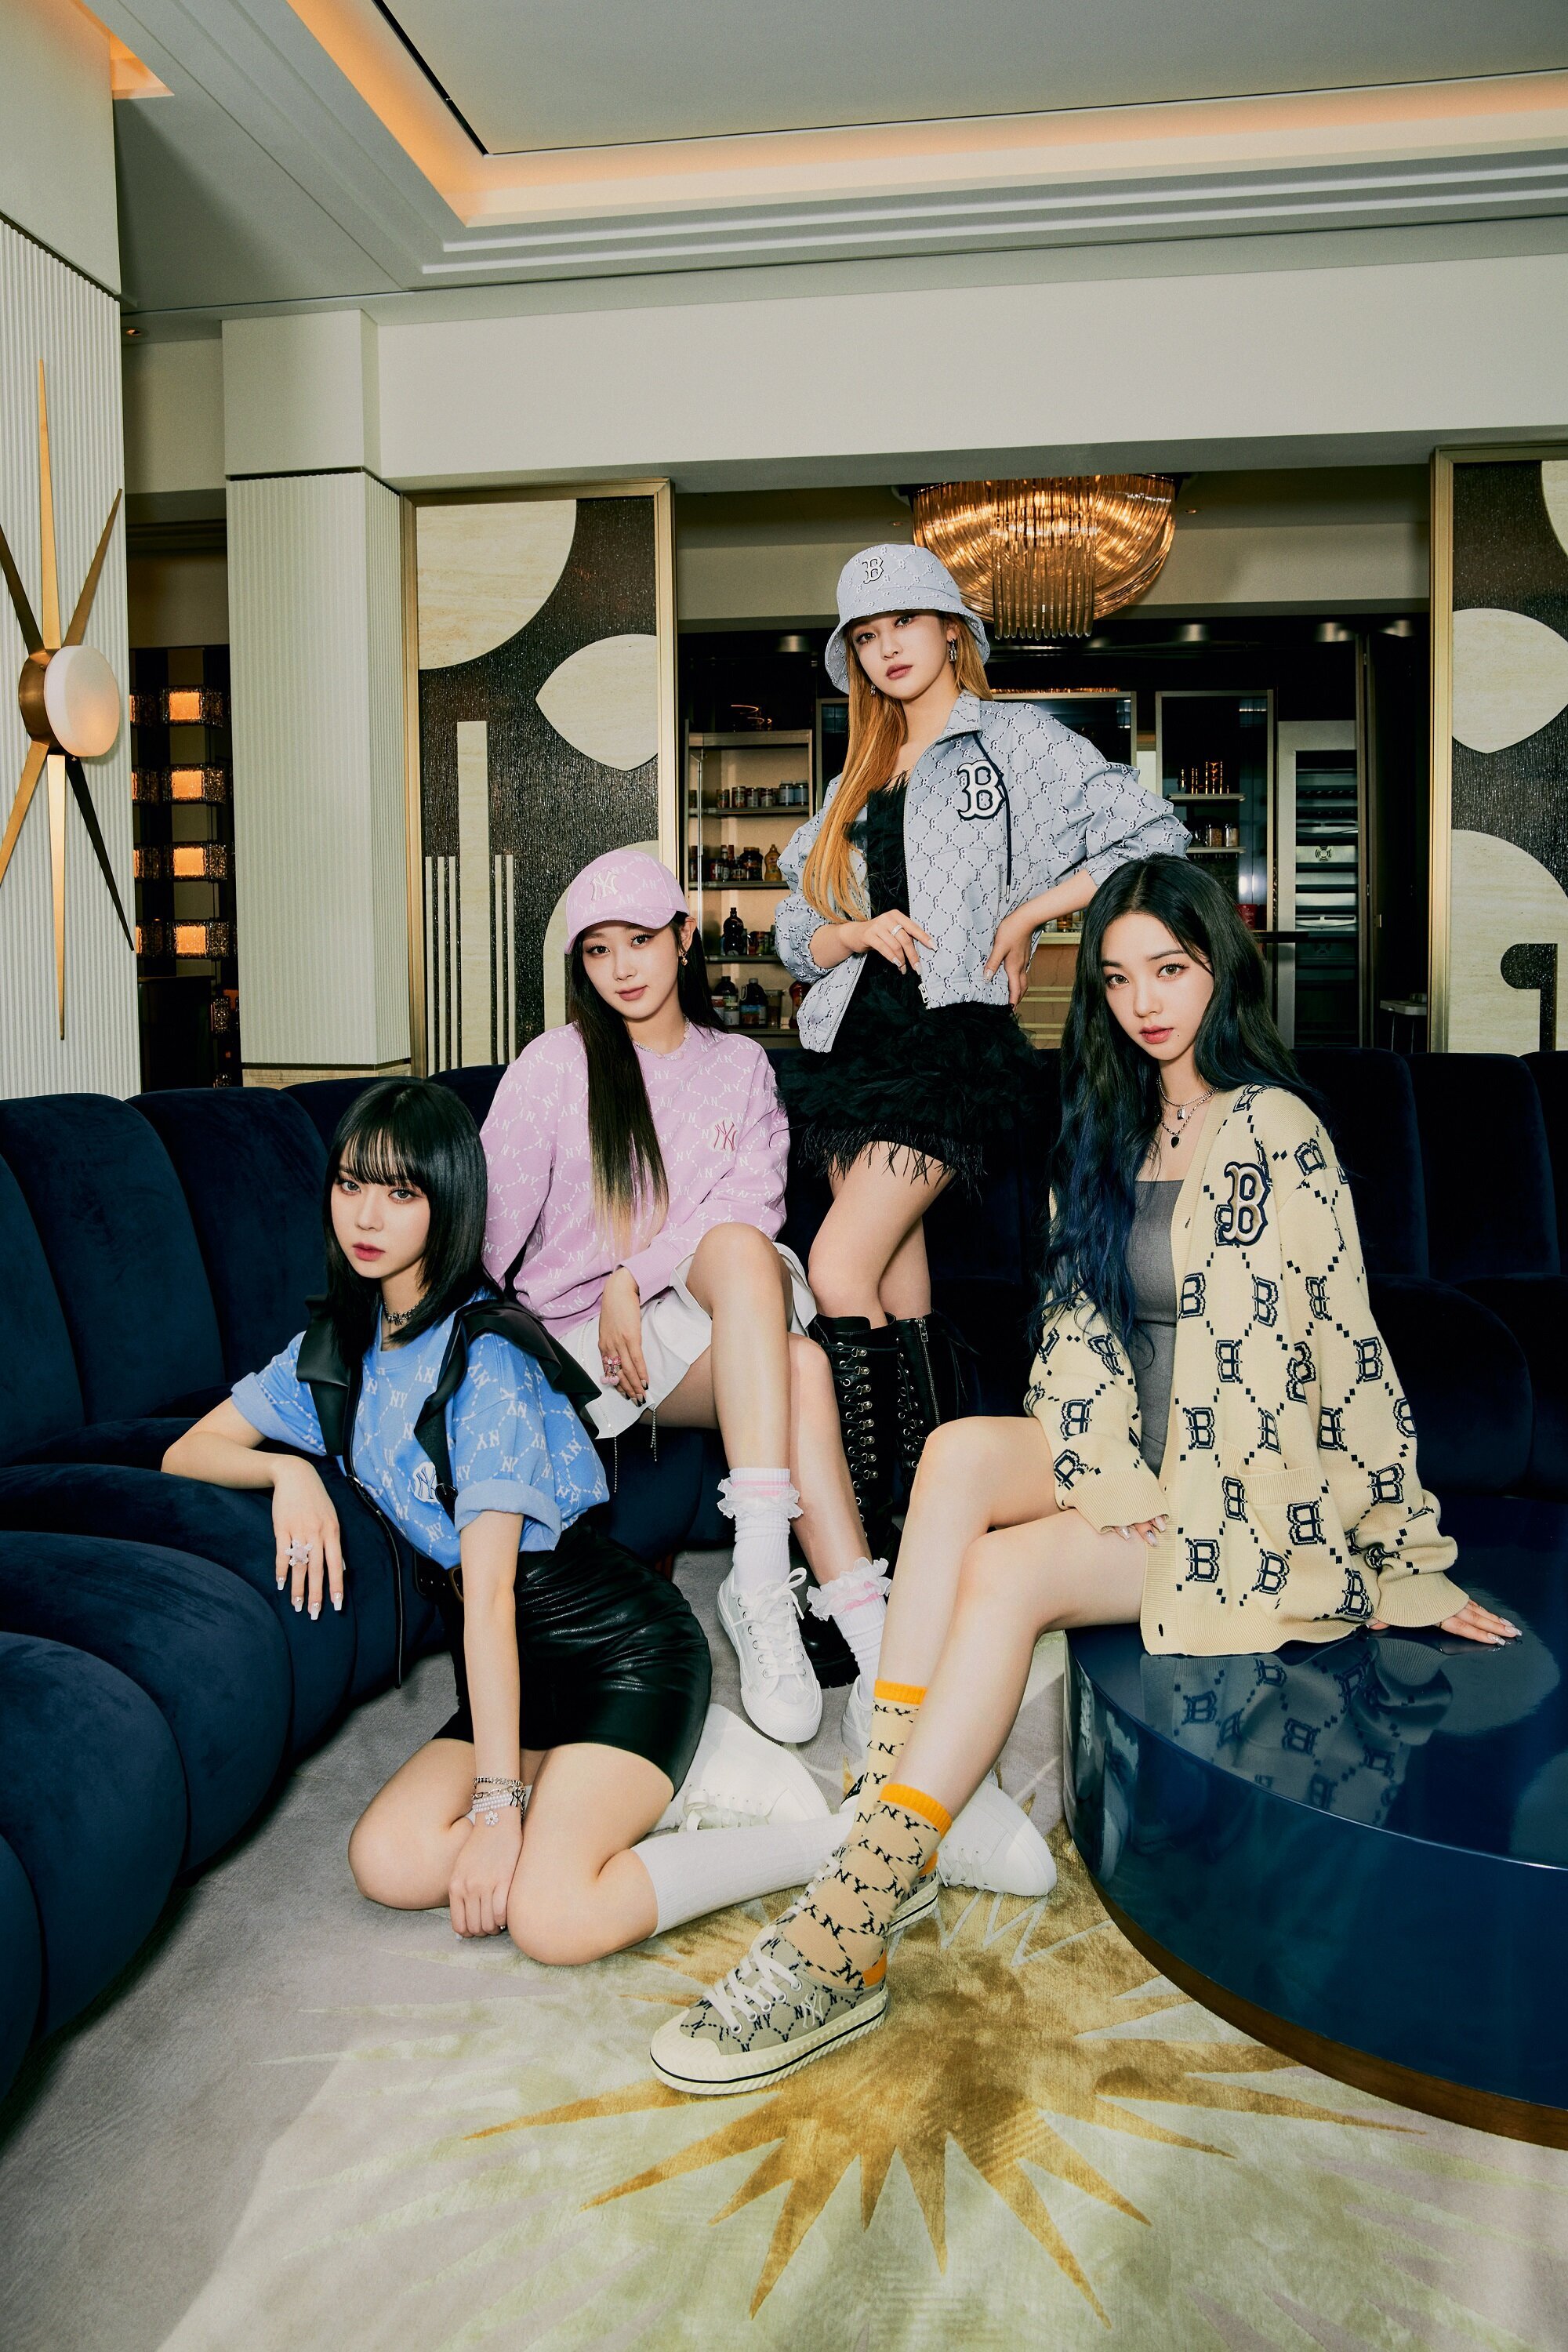 Aespa Stun With Their Visuals And Their Modeling Skills In Photoshoot For  Fashion Brand MLB - Koreaboo